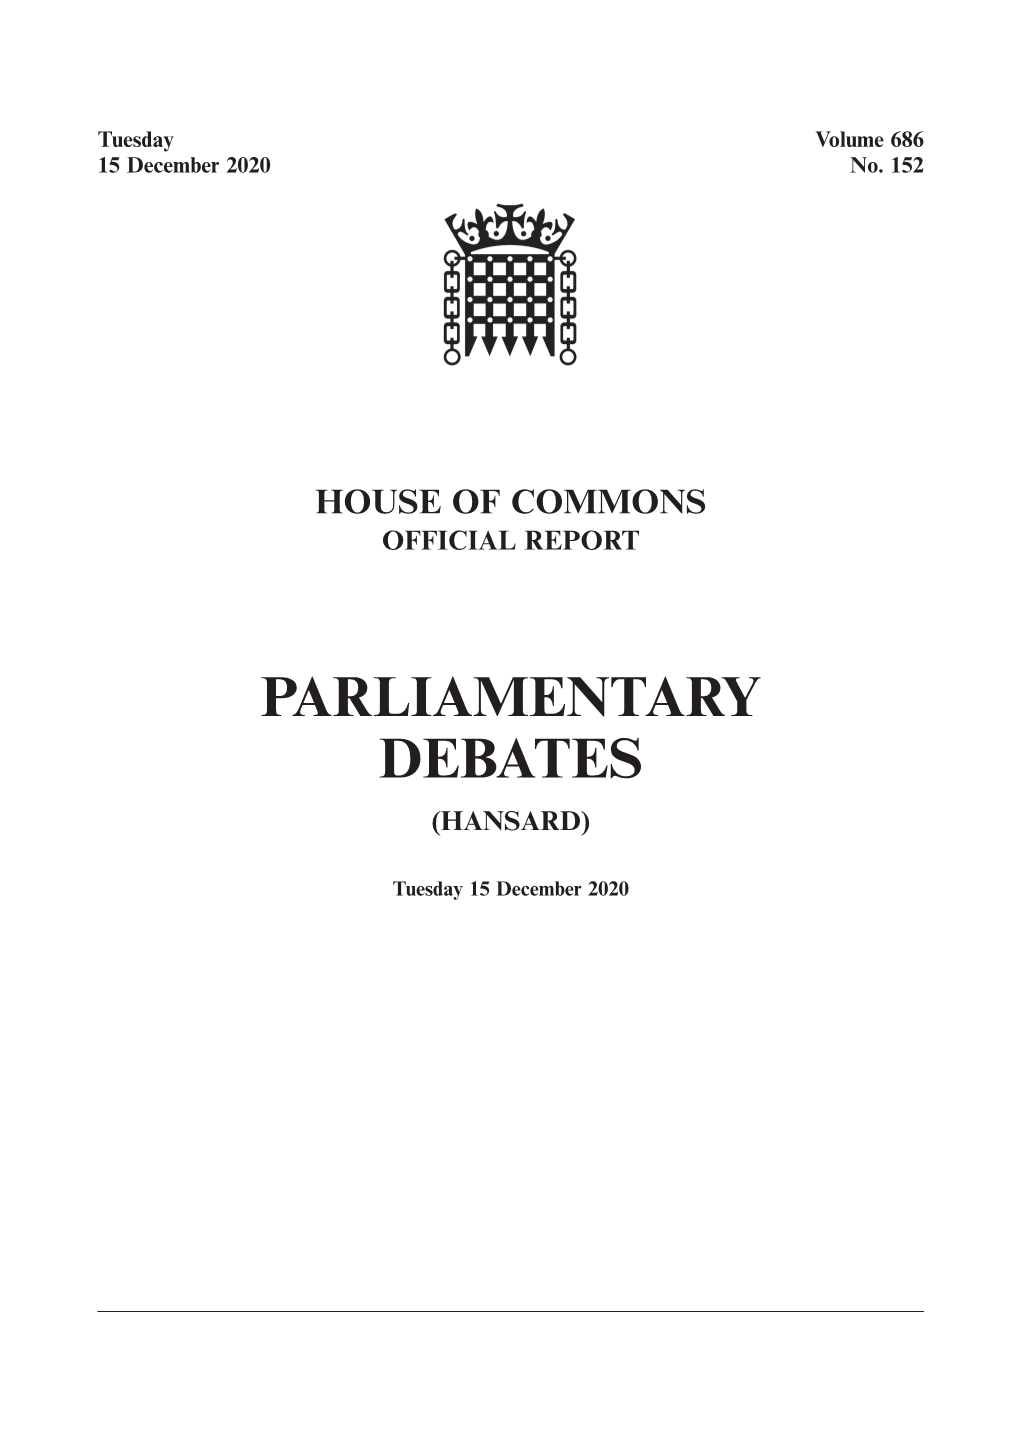 Whole Day Download the Hansard Record of the Entire Day in PDF Format. PDF File, 1.16